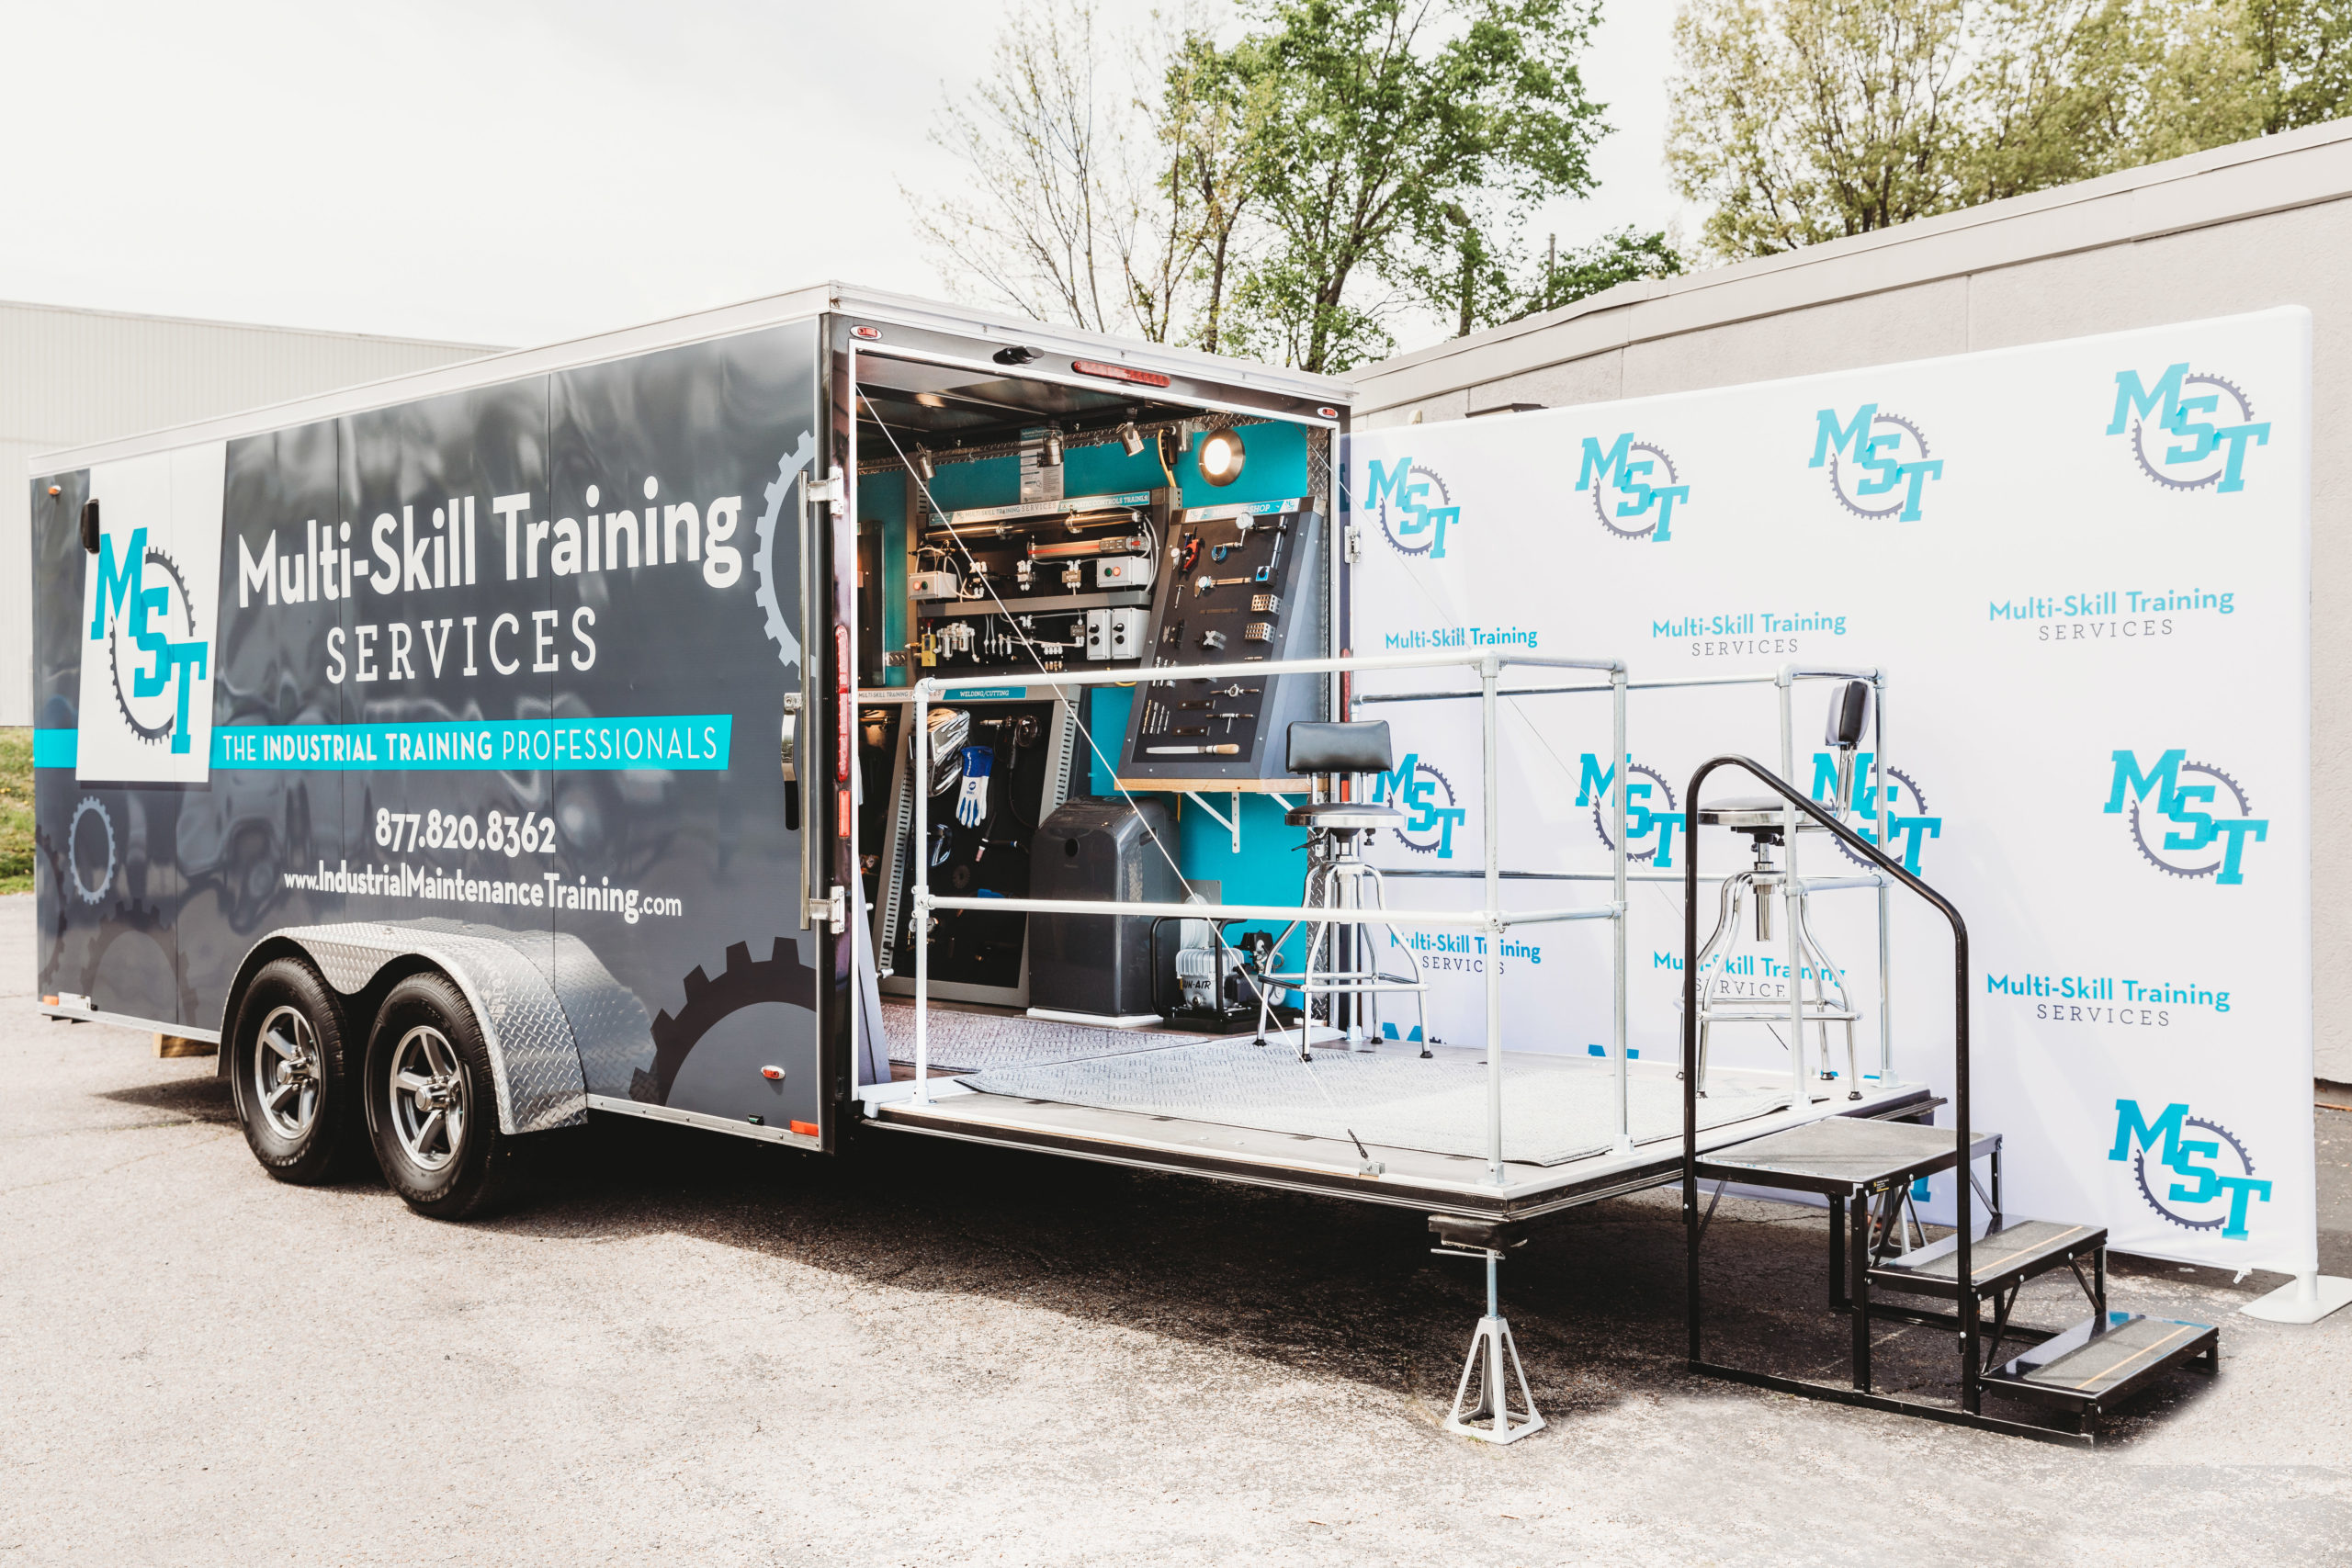 Interested in scheduling a demo of the MST Training Trailer? Contact us today!